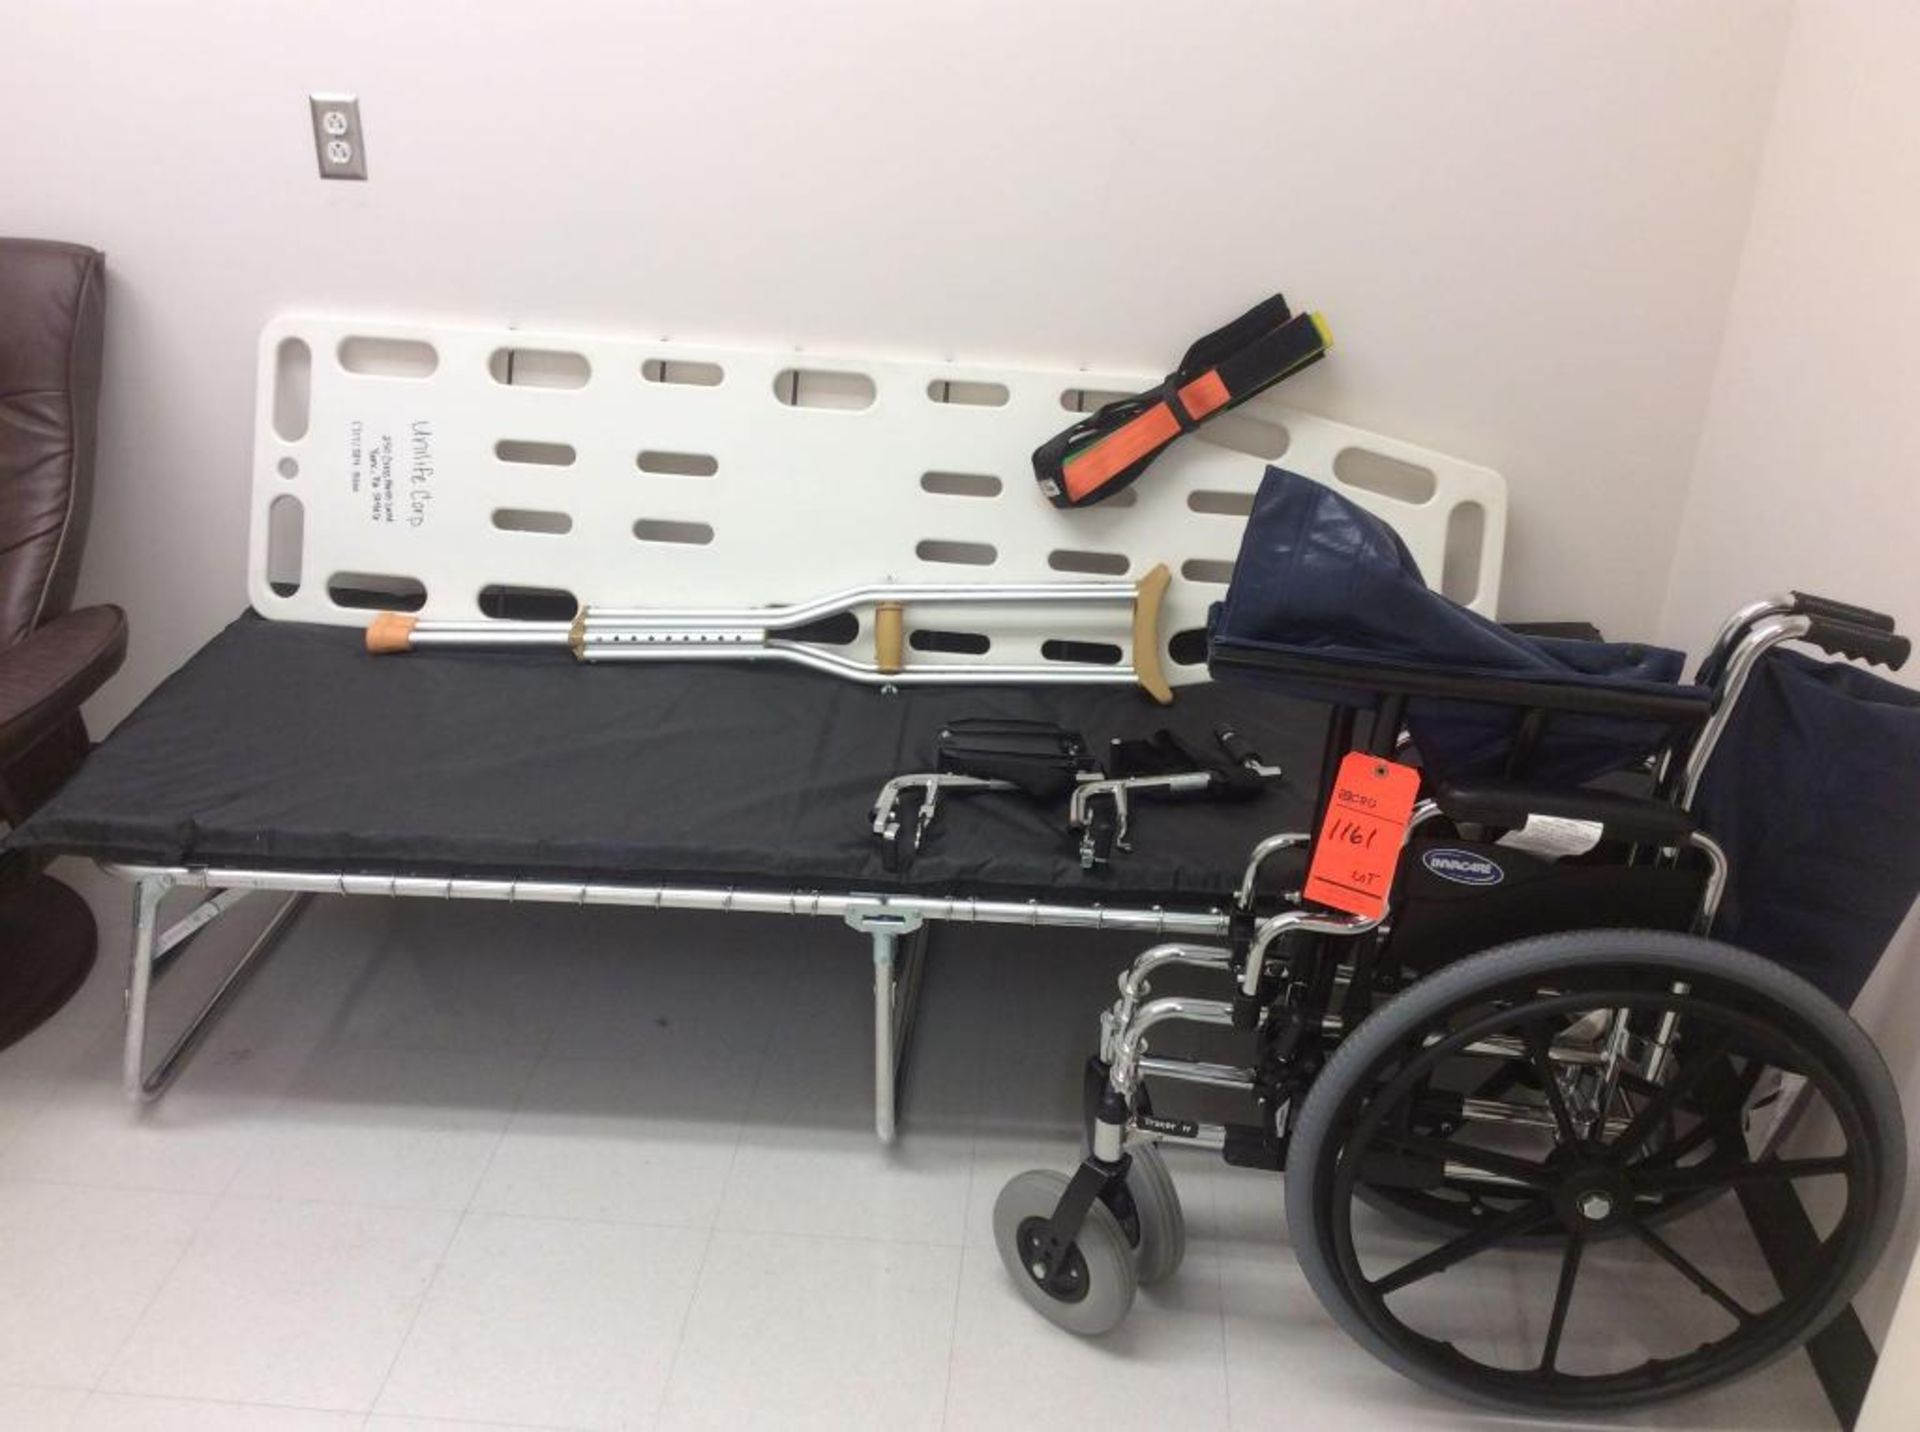 Lot of first aid / response equipment including wheel chair, stretcher, crutches, cot, exam chair, f - Image 2 of 3